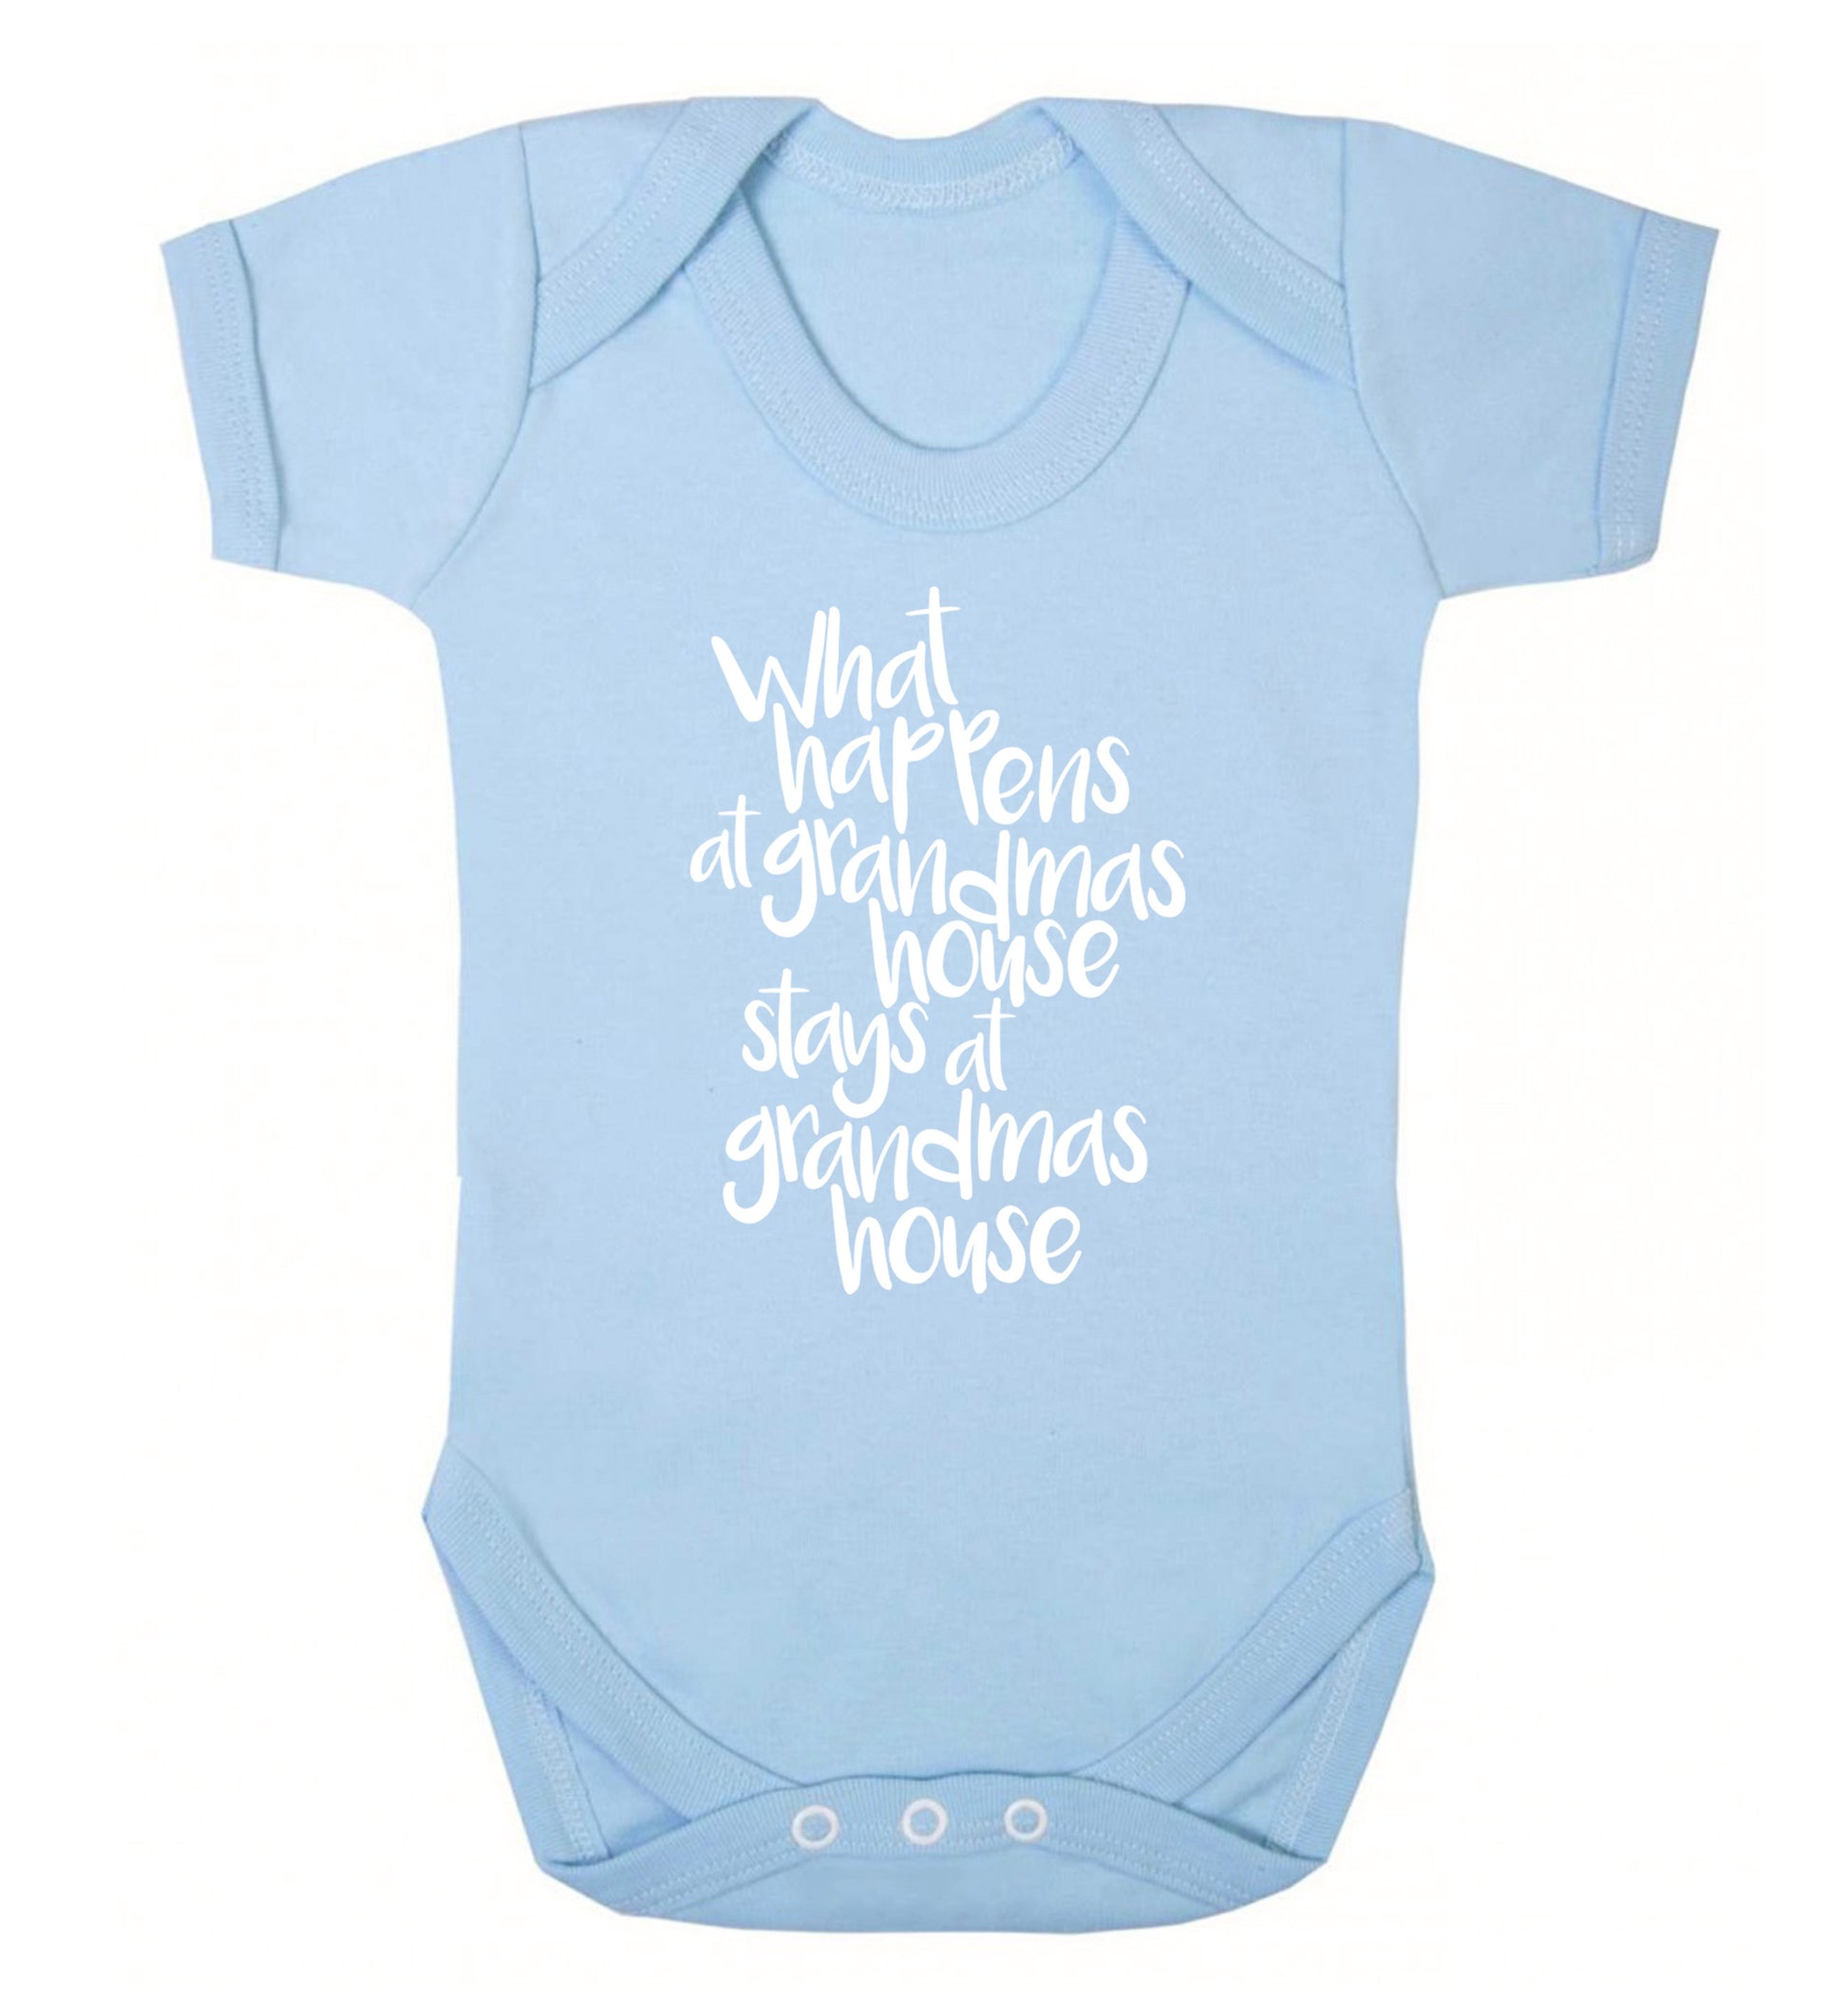 What happens at grandmas house stays at grandmas house Baby Vest pale blue 18-24 months